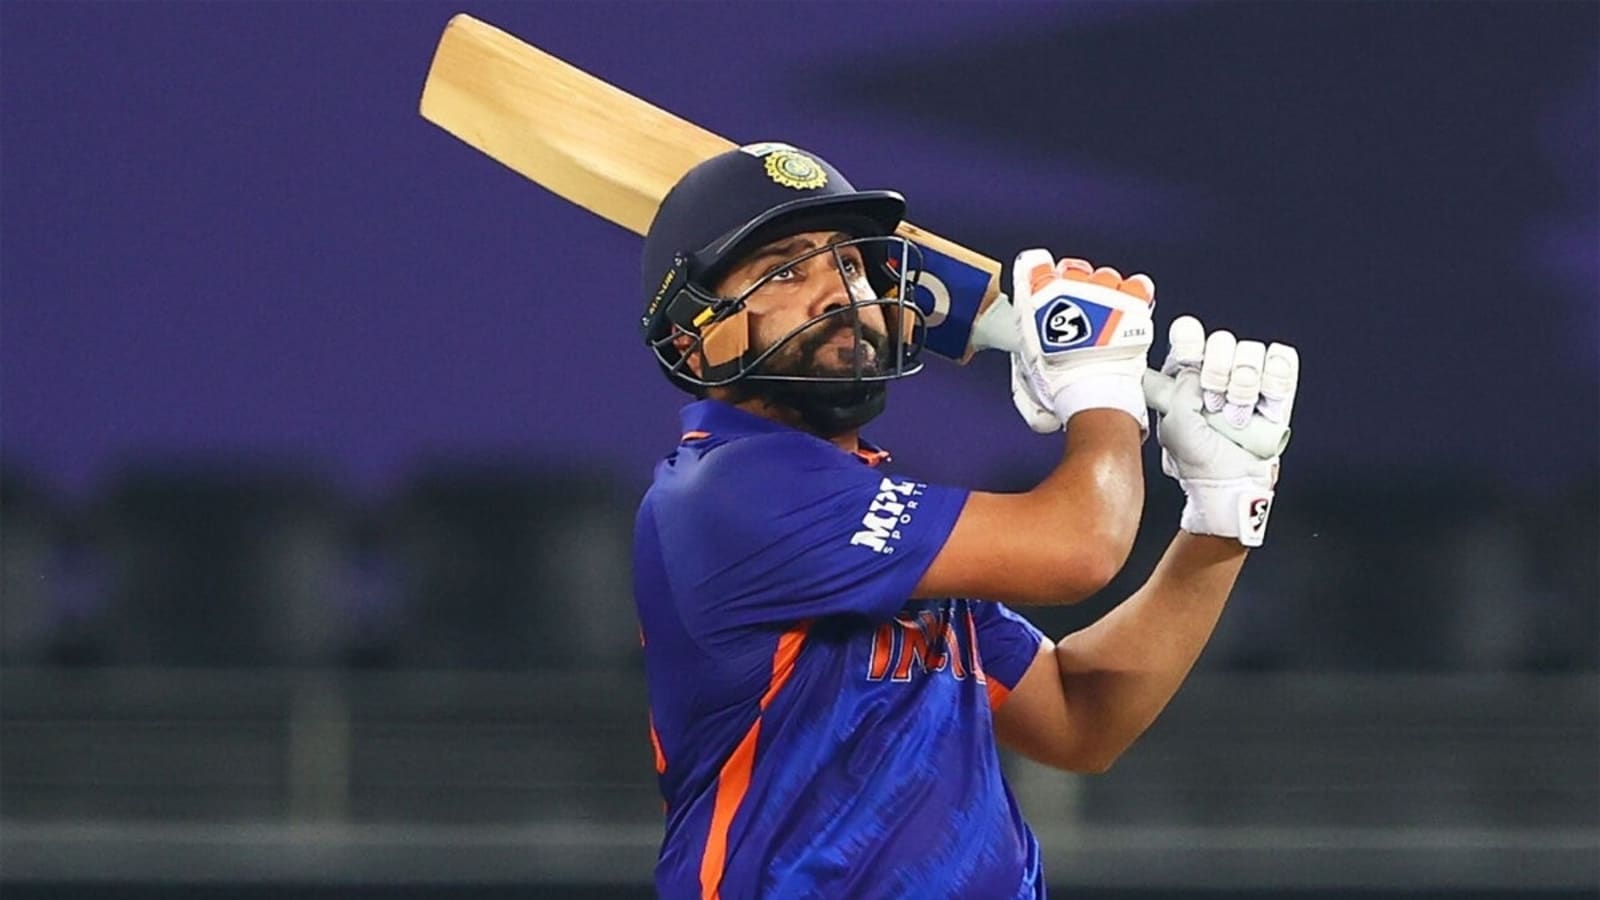 Indian skipper Rohit Sharma becomes 6th-highest run scorer for India in ODIs